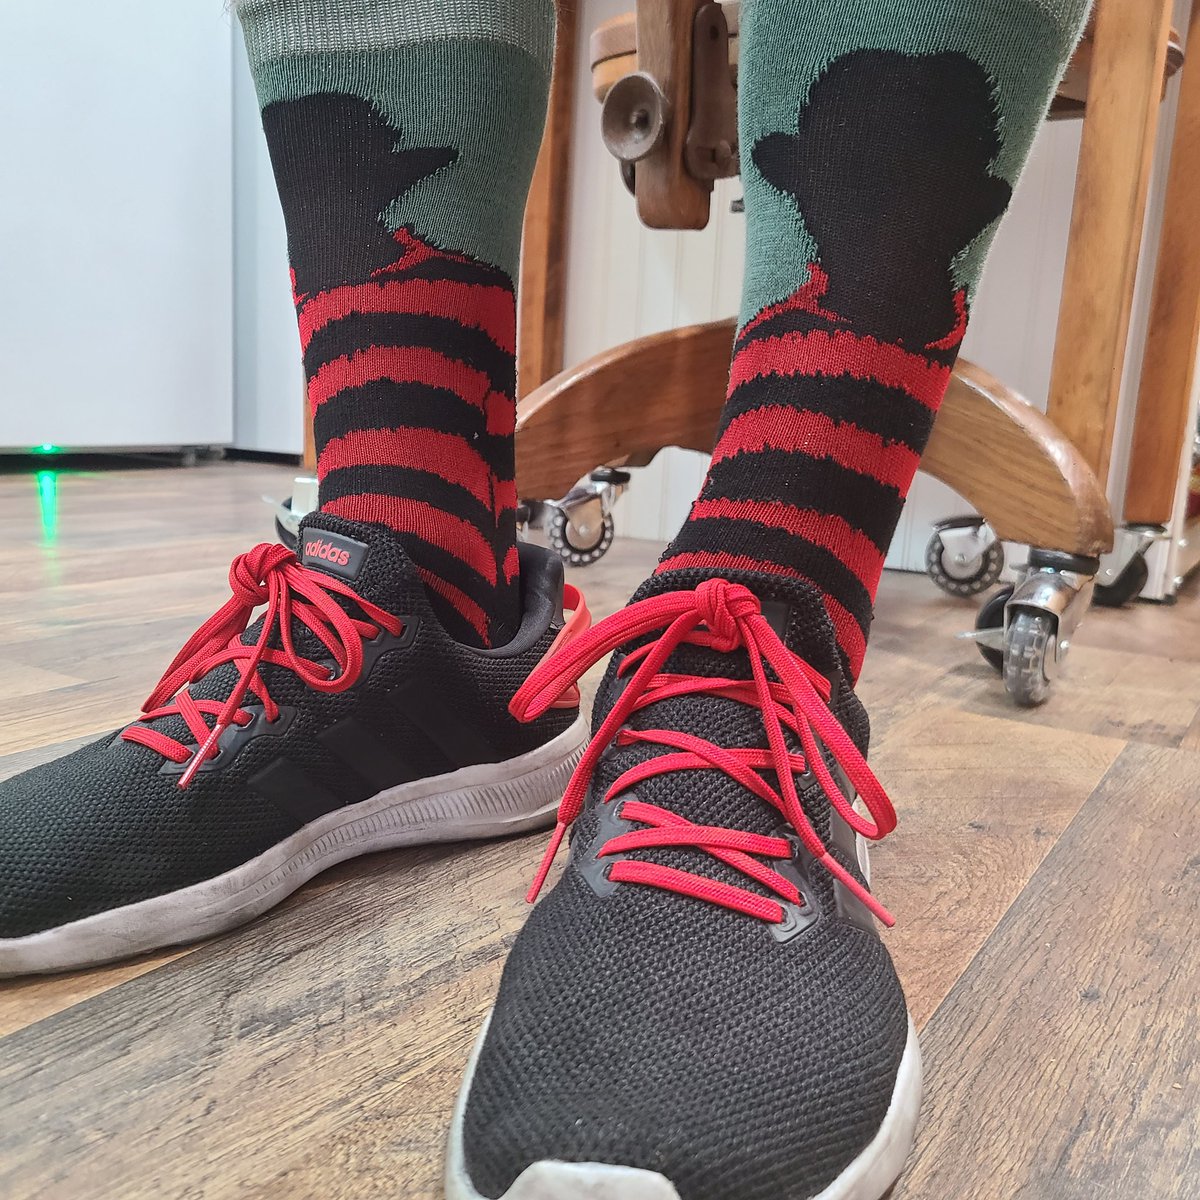 These are supposed to be Freddy Kruger socks but all I see is Yoda & Adidas Lite Racer BYD 2.0 #freddykrueger #popculture #socksofinstagram #ootd #shoesofinstagram #adidas @Adidas  #literacer #yesadidas #threestripes #threestripelife